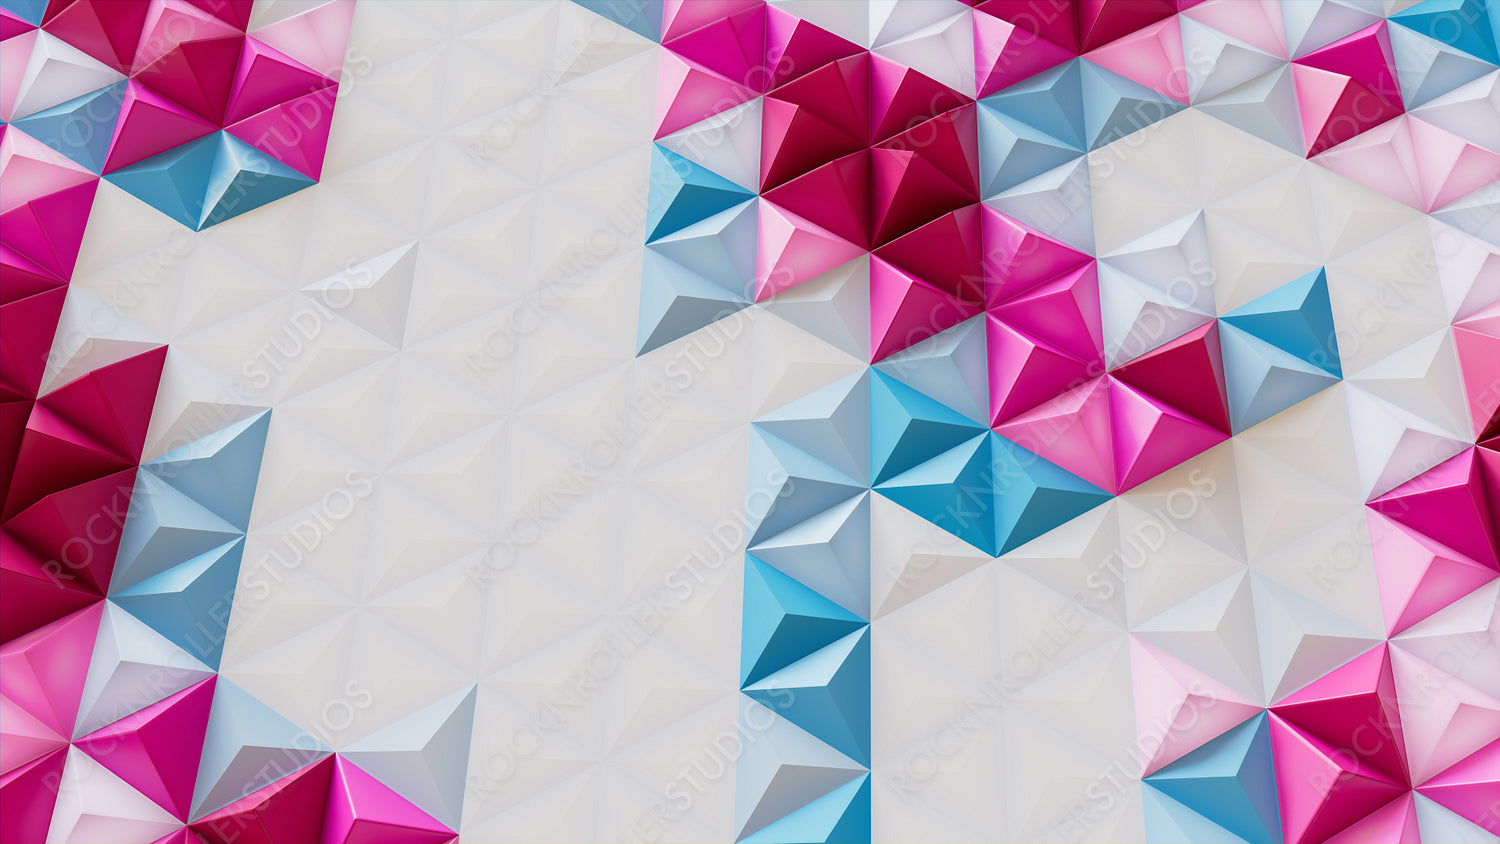 White, Blue and Pink Geometric Surface with Tetrahedrons. Futuristic, Vibrant 3d Wallpaper.